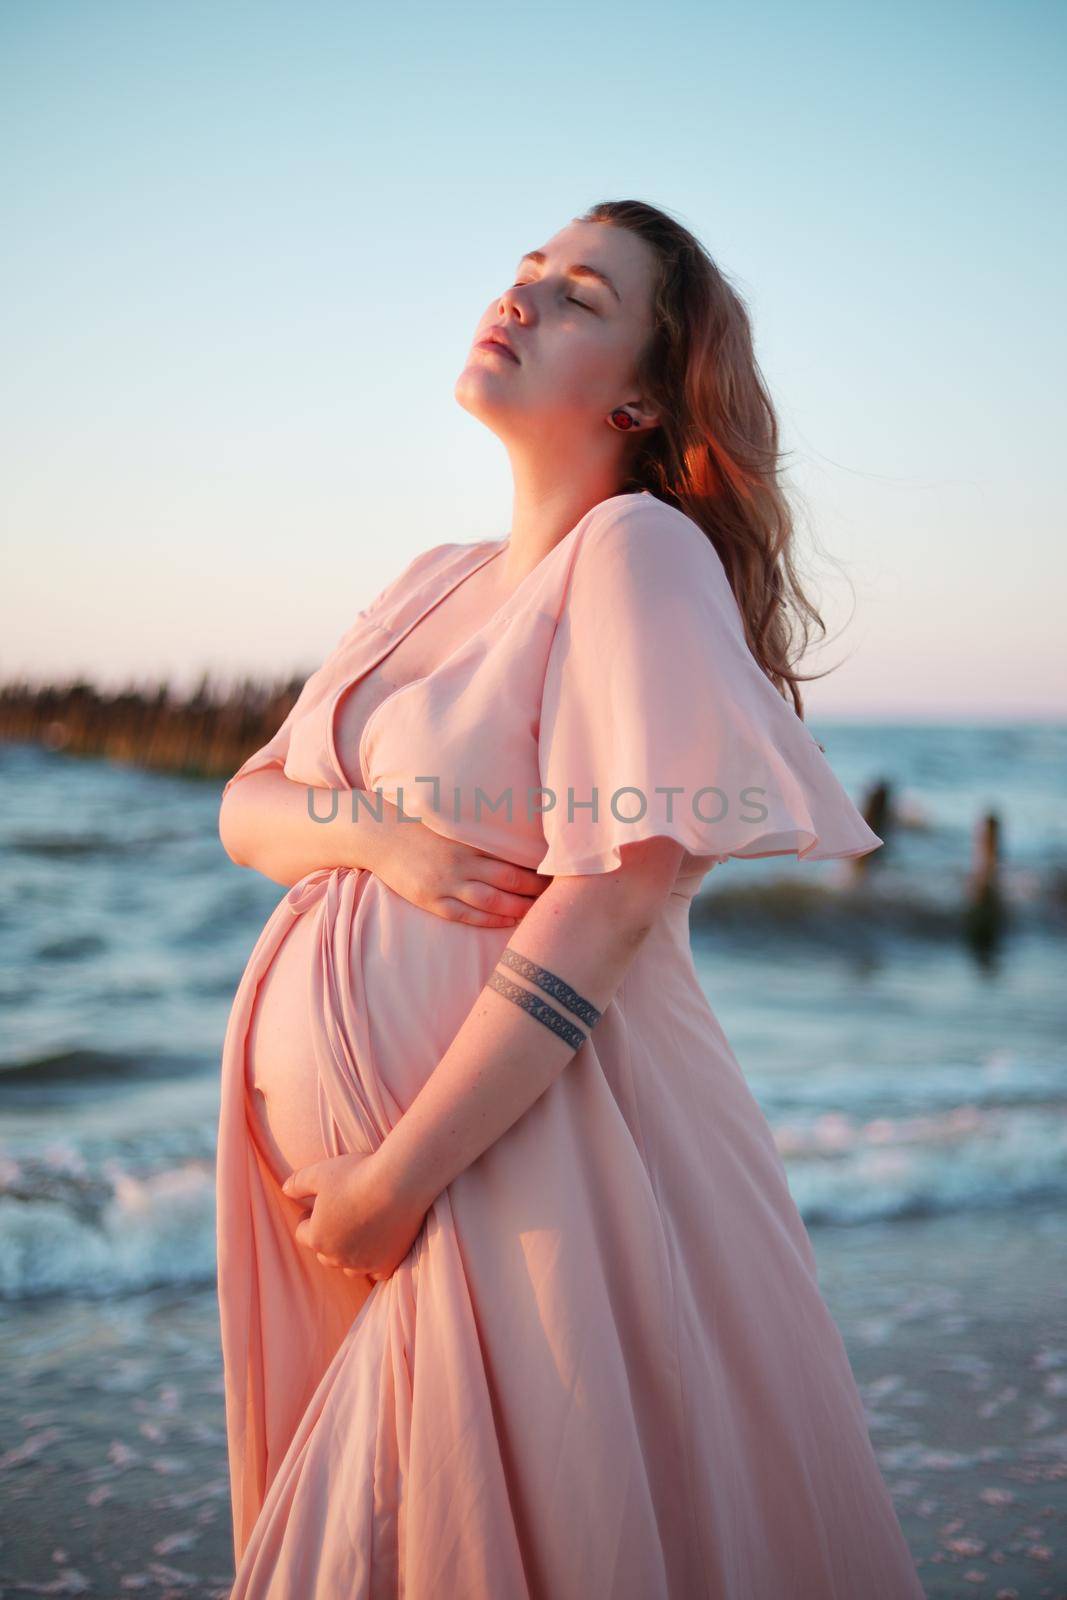 Young pregnant woman with a beautiful sea view on the background. Happy and calm pregnant woman with long hair and pink dress standig on the beach. Romantic view, ocean, sunset, maternity